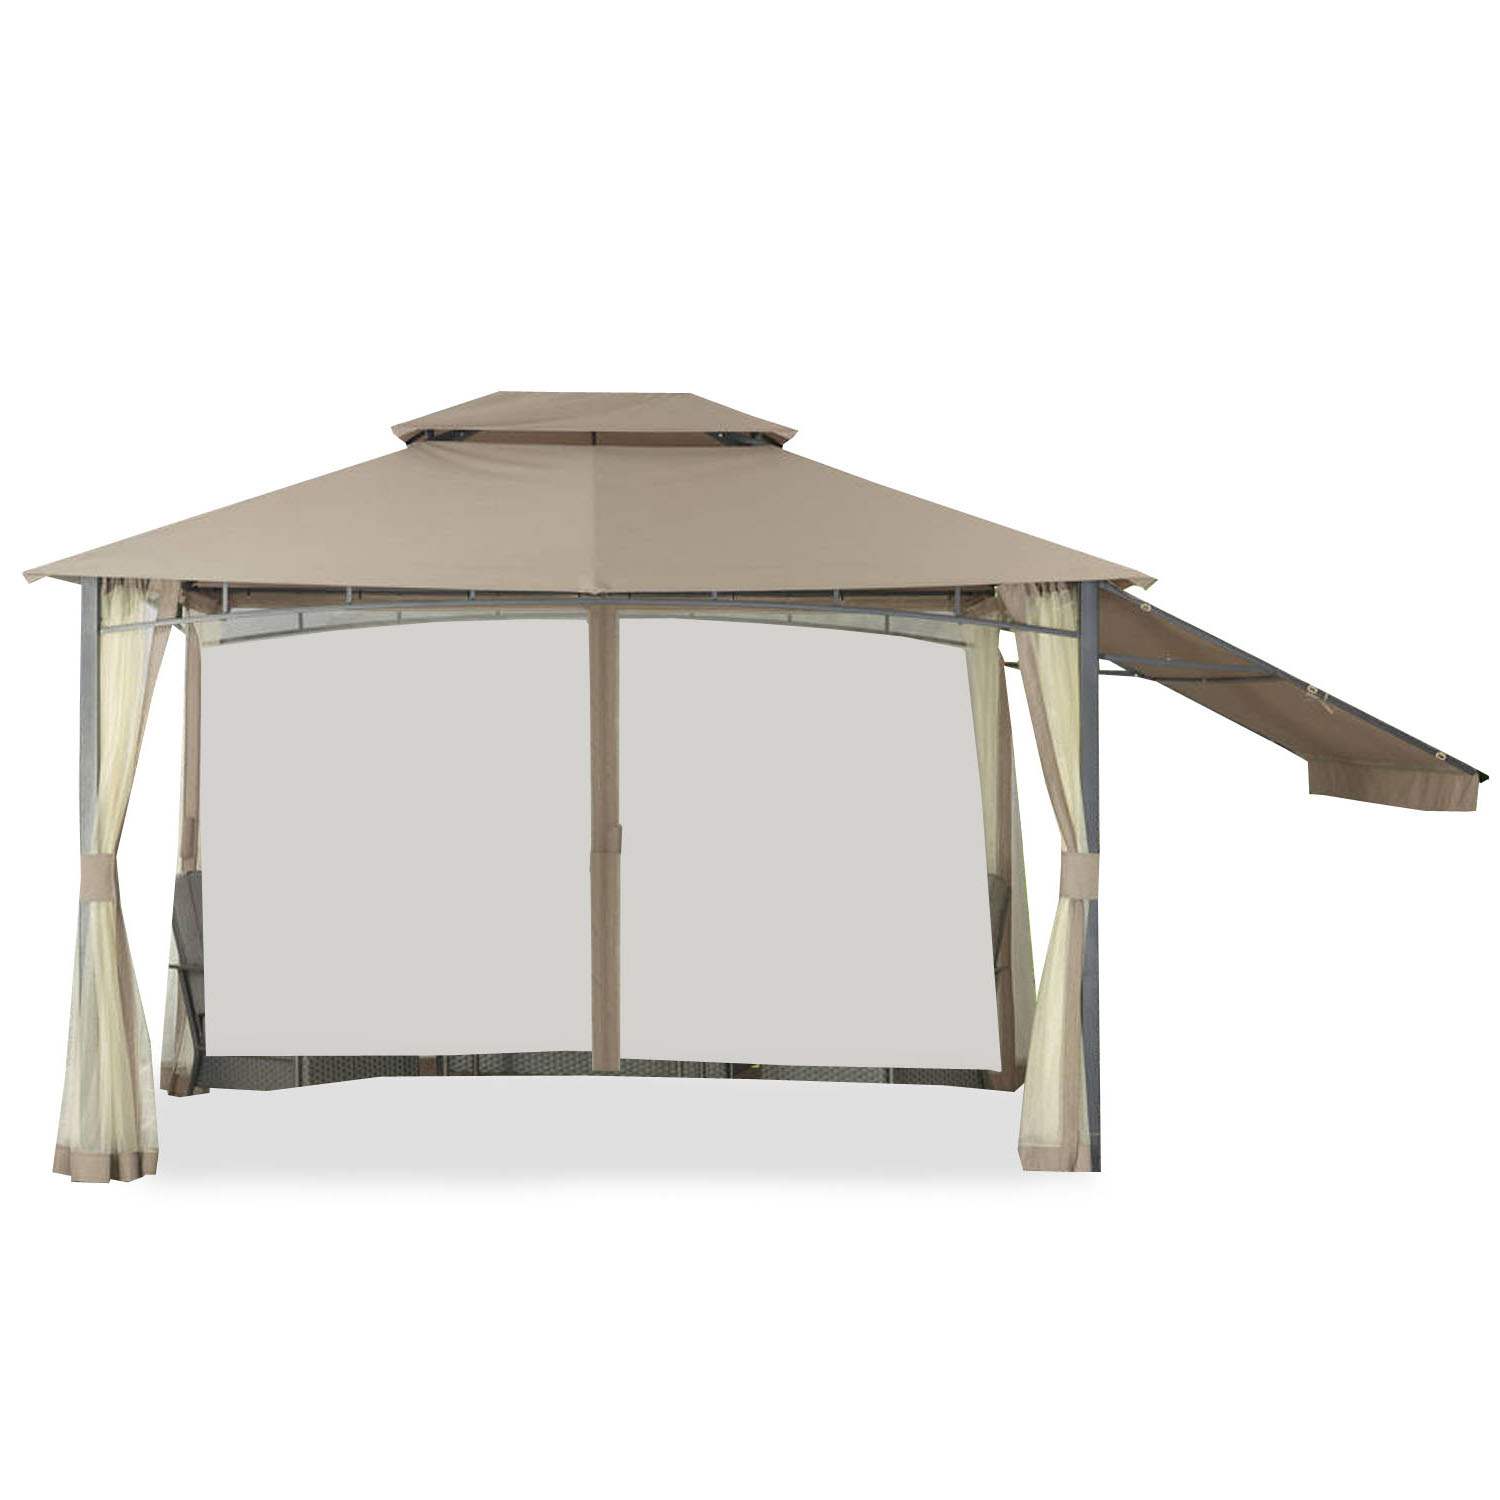 Replacement Canopy for Cabin Style Gazebo - RipLock 350